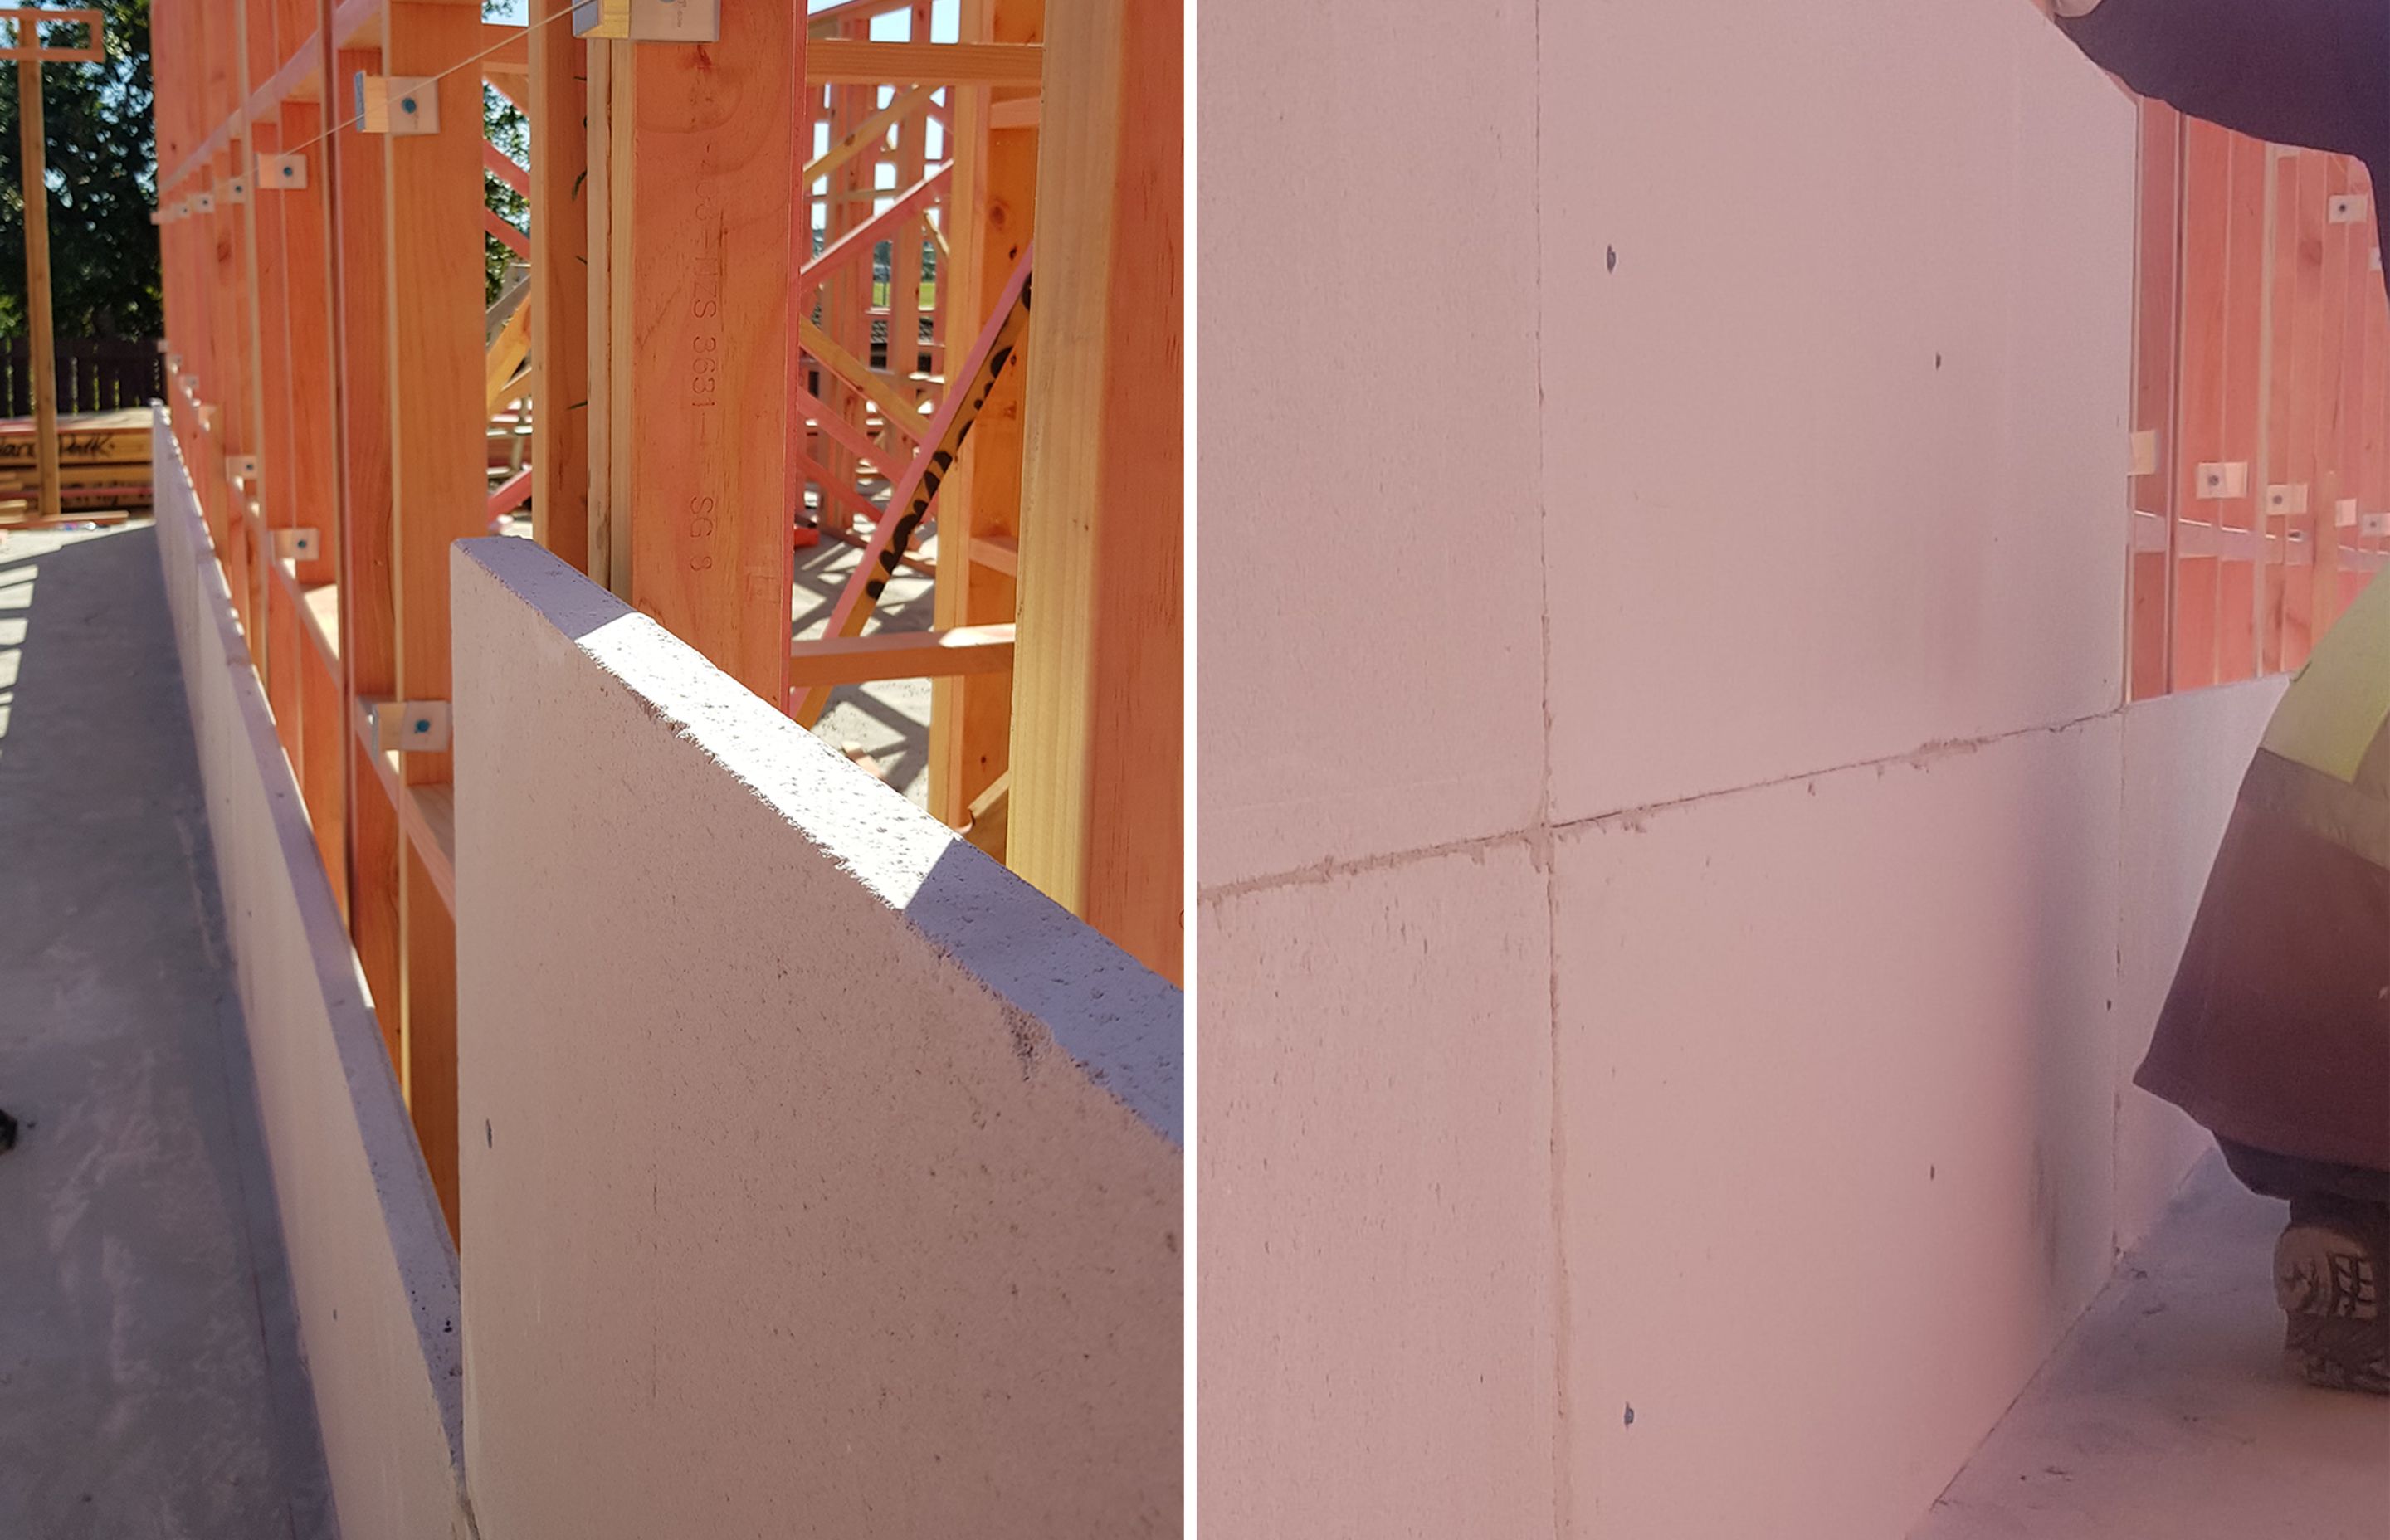 The INTEGRA Central Barrier Intertenancy Wall system is a lightweight concrete panel system designed for easy installation in medium-density, multi-unit developments.